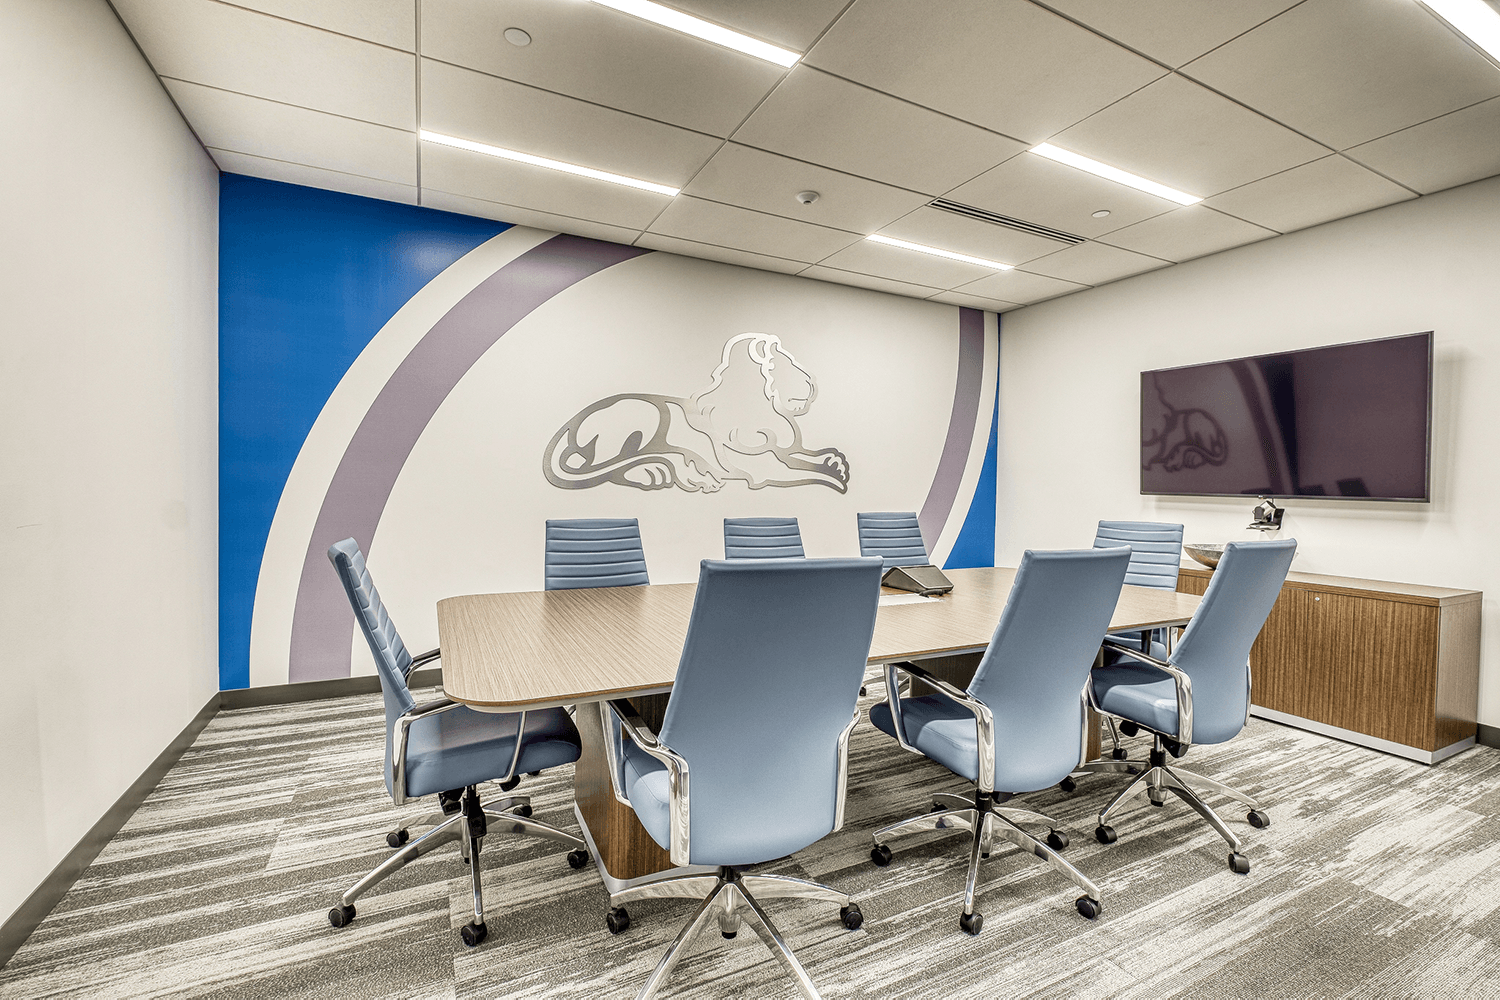 conference room with blue-gray chairs, a TV, and a large wall design featuring a metal lion outline